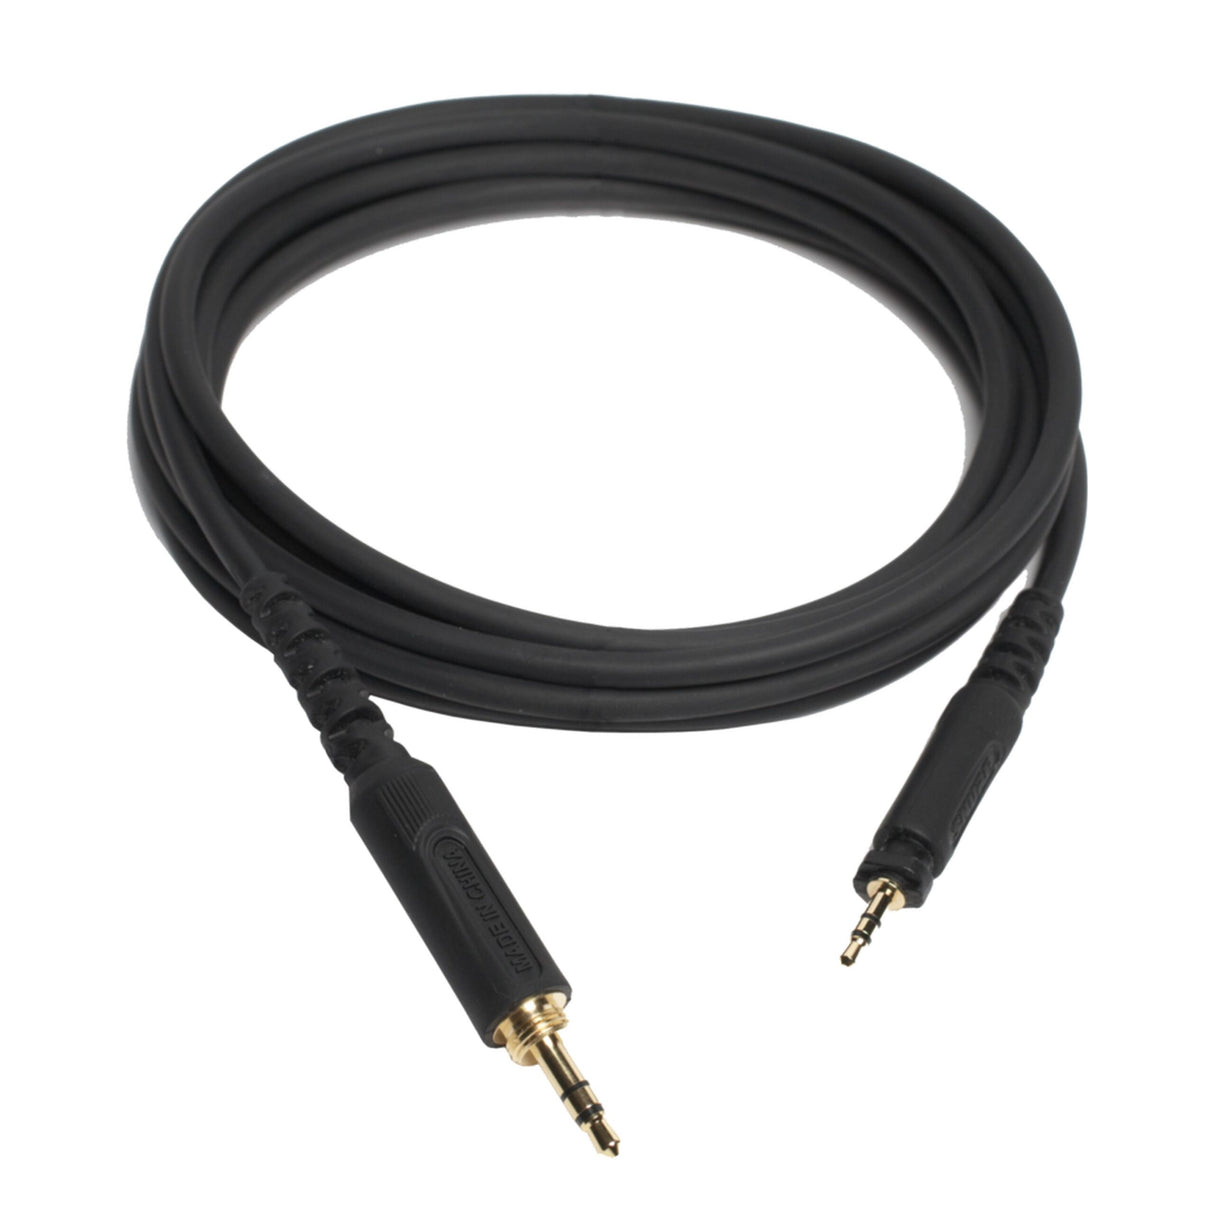 Shure HPASCA1 2.5m Straight Headphone Cable for SRH440, SRH840, SRH940 and SRH750DJ